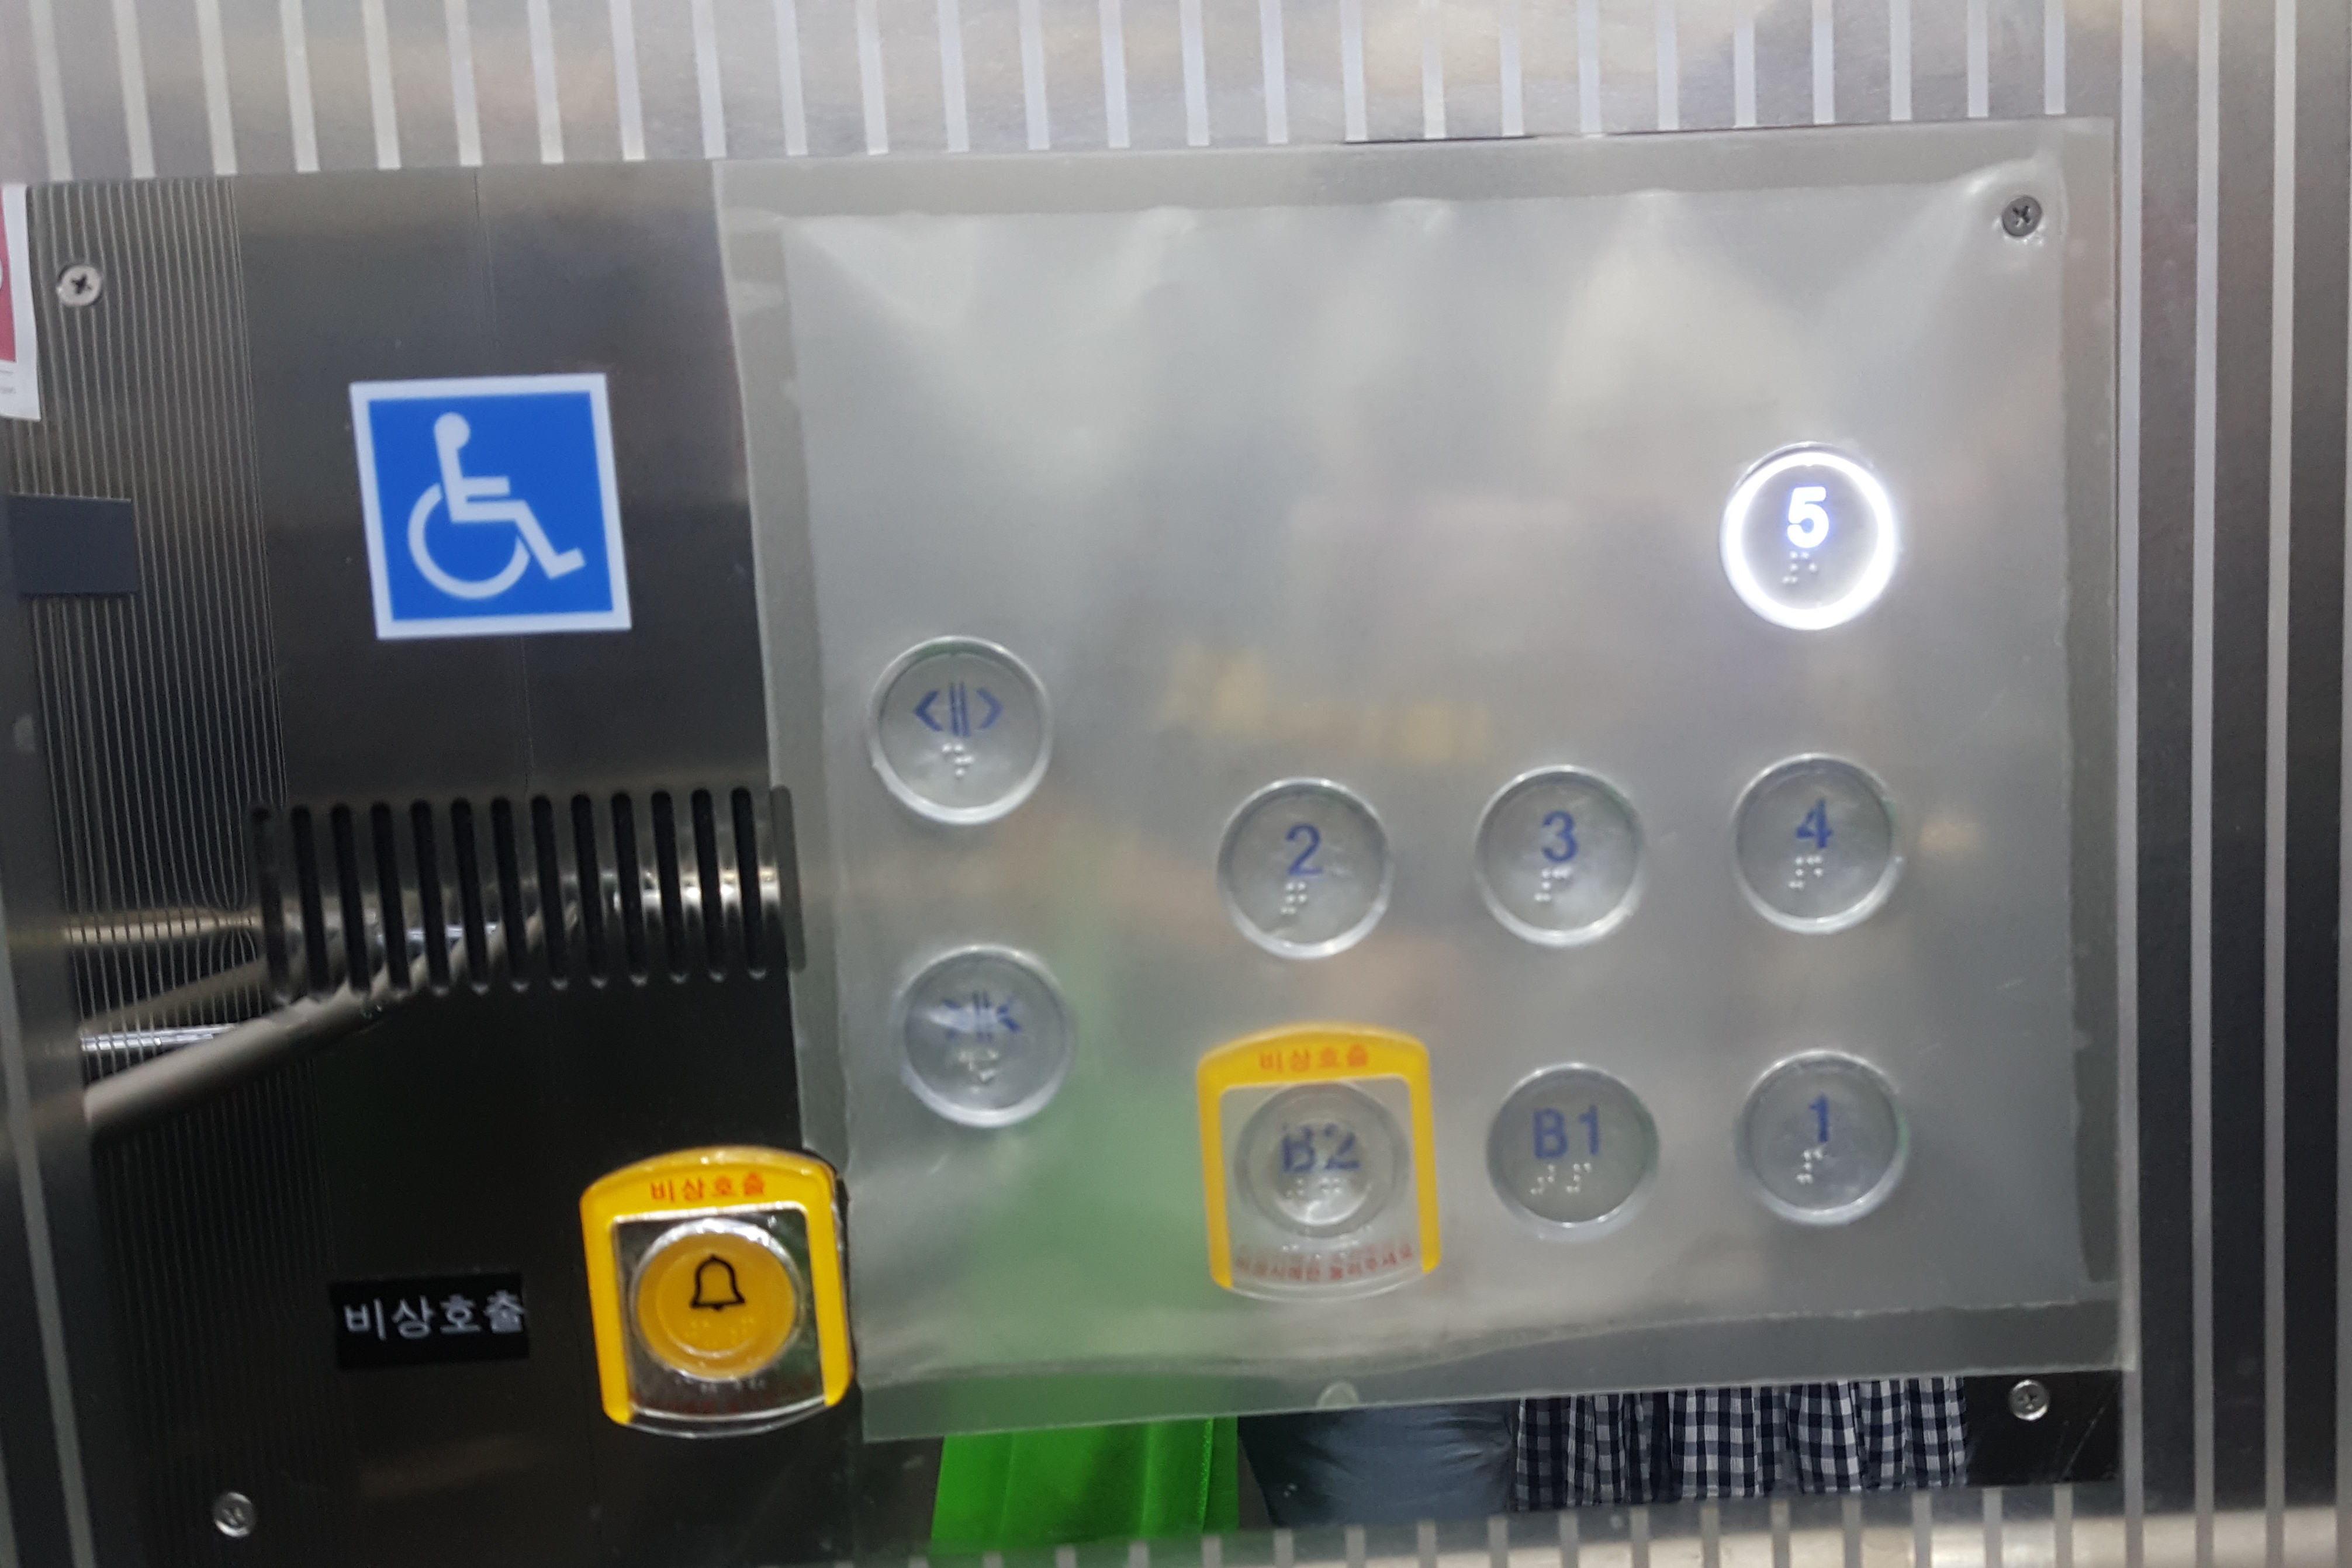 Elevators 0 : Emergency call button and buttons with Korean braille description installed in the elevator of Seongbuk Children’s Museum